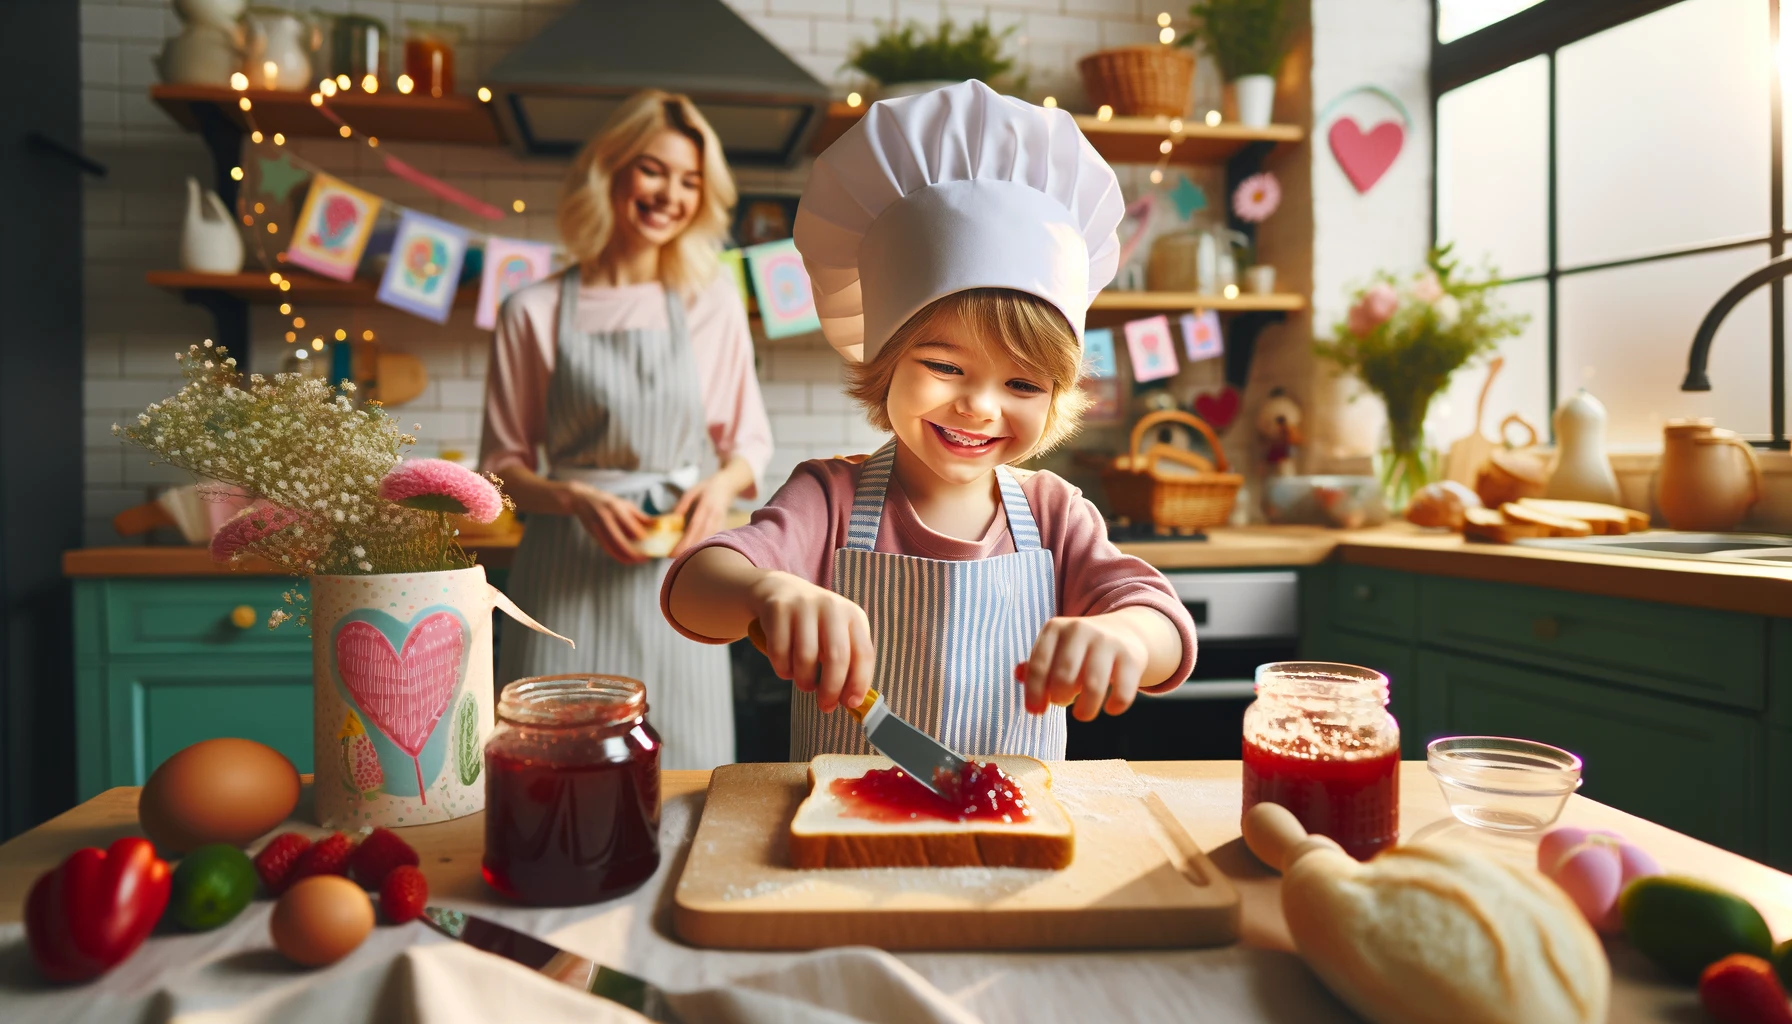 Kid-Friendly Kitchen: Involving the Little Ones in Preparing Mother's Day Brunch